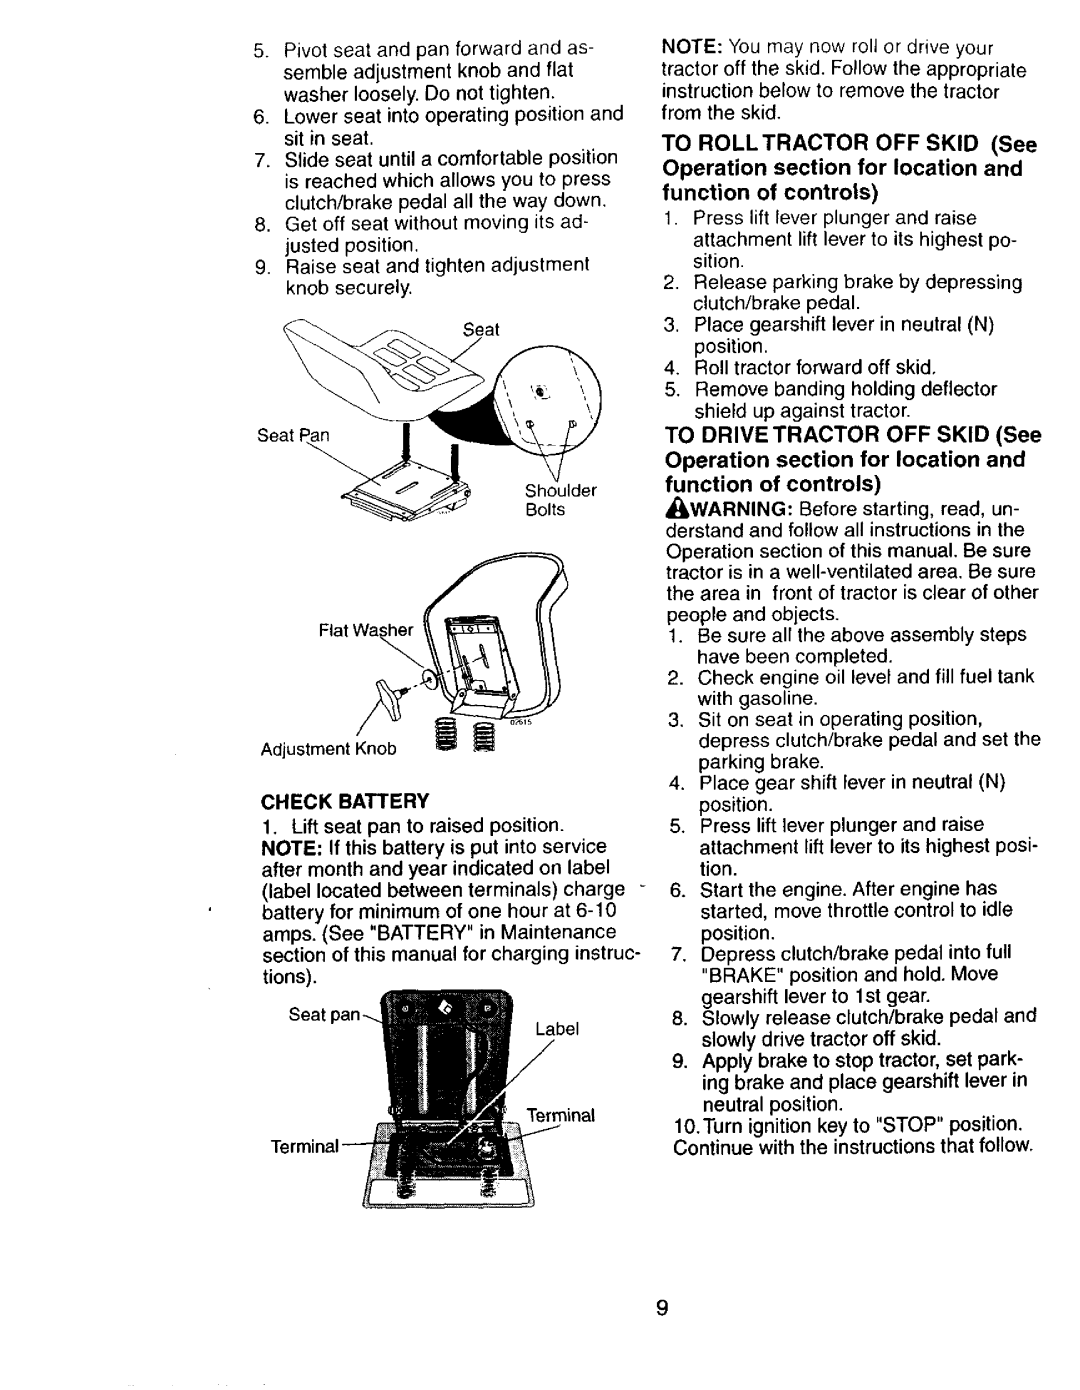 Craftsman 917272673 owner manual CHECK BATTERY 1.Lift seat pan to raised position 